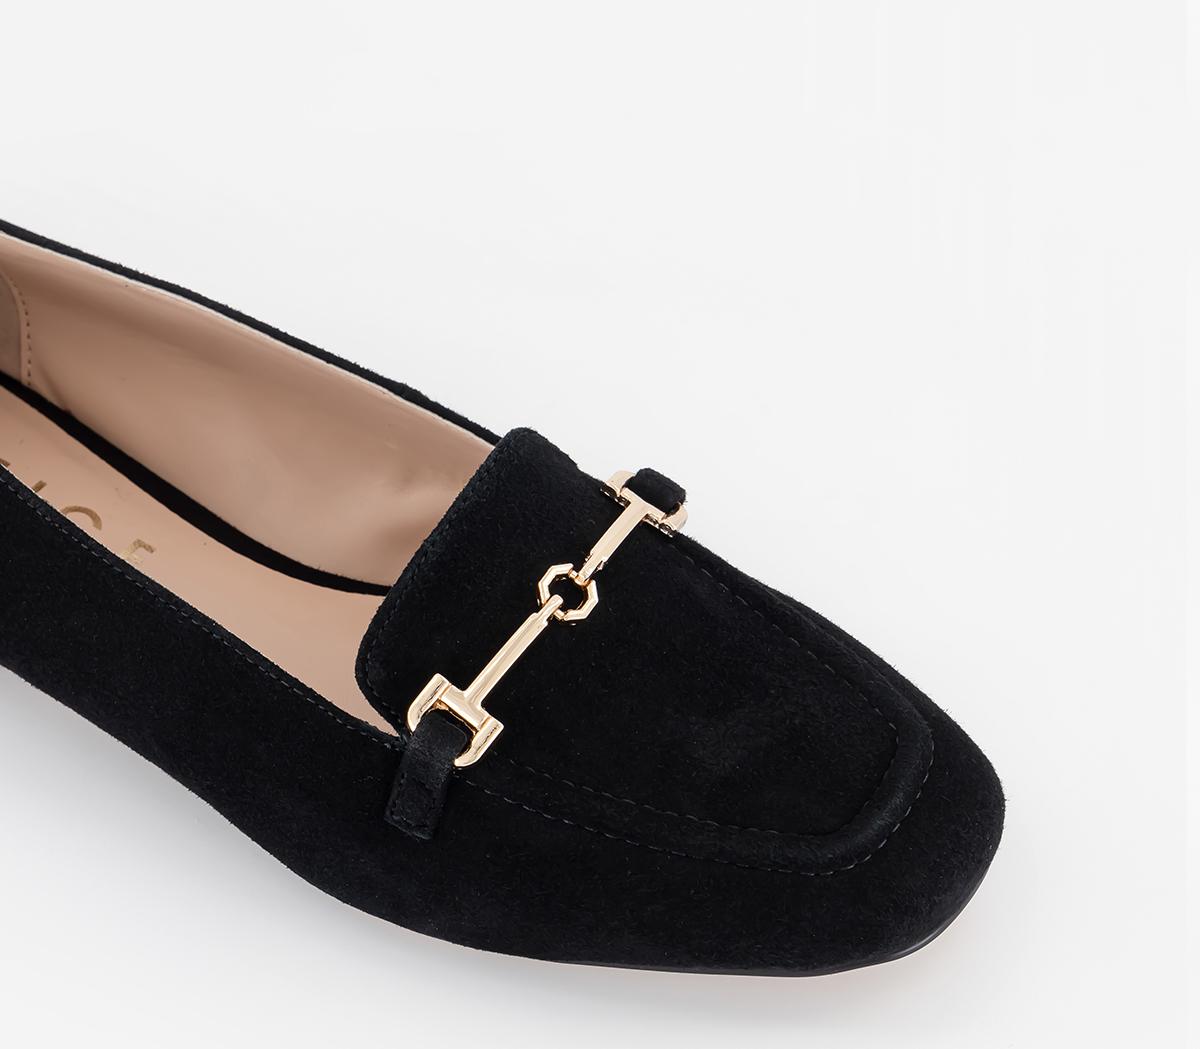 OFFICE Flying High Snaffle Suede Loafers Black Suede - Flat Shoes for Women